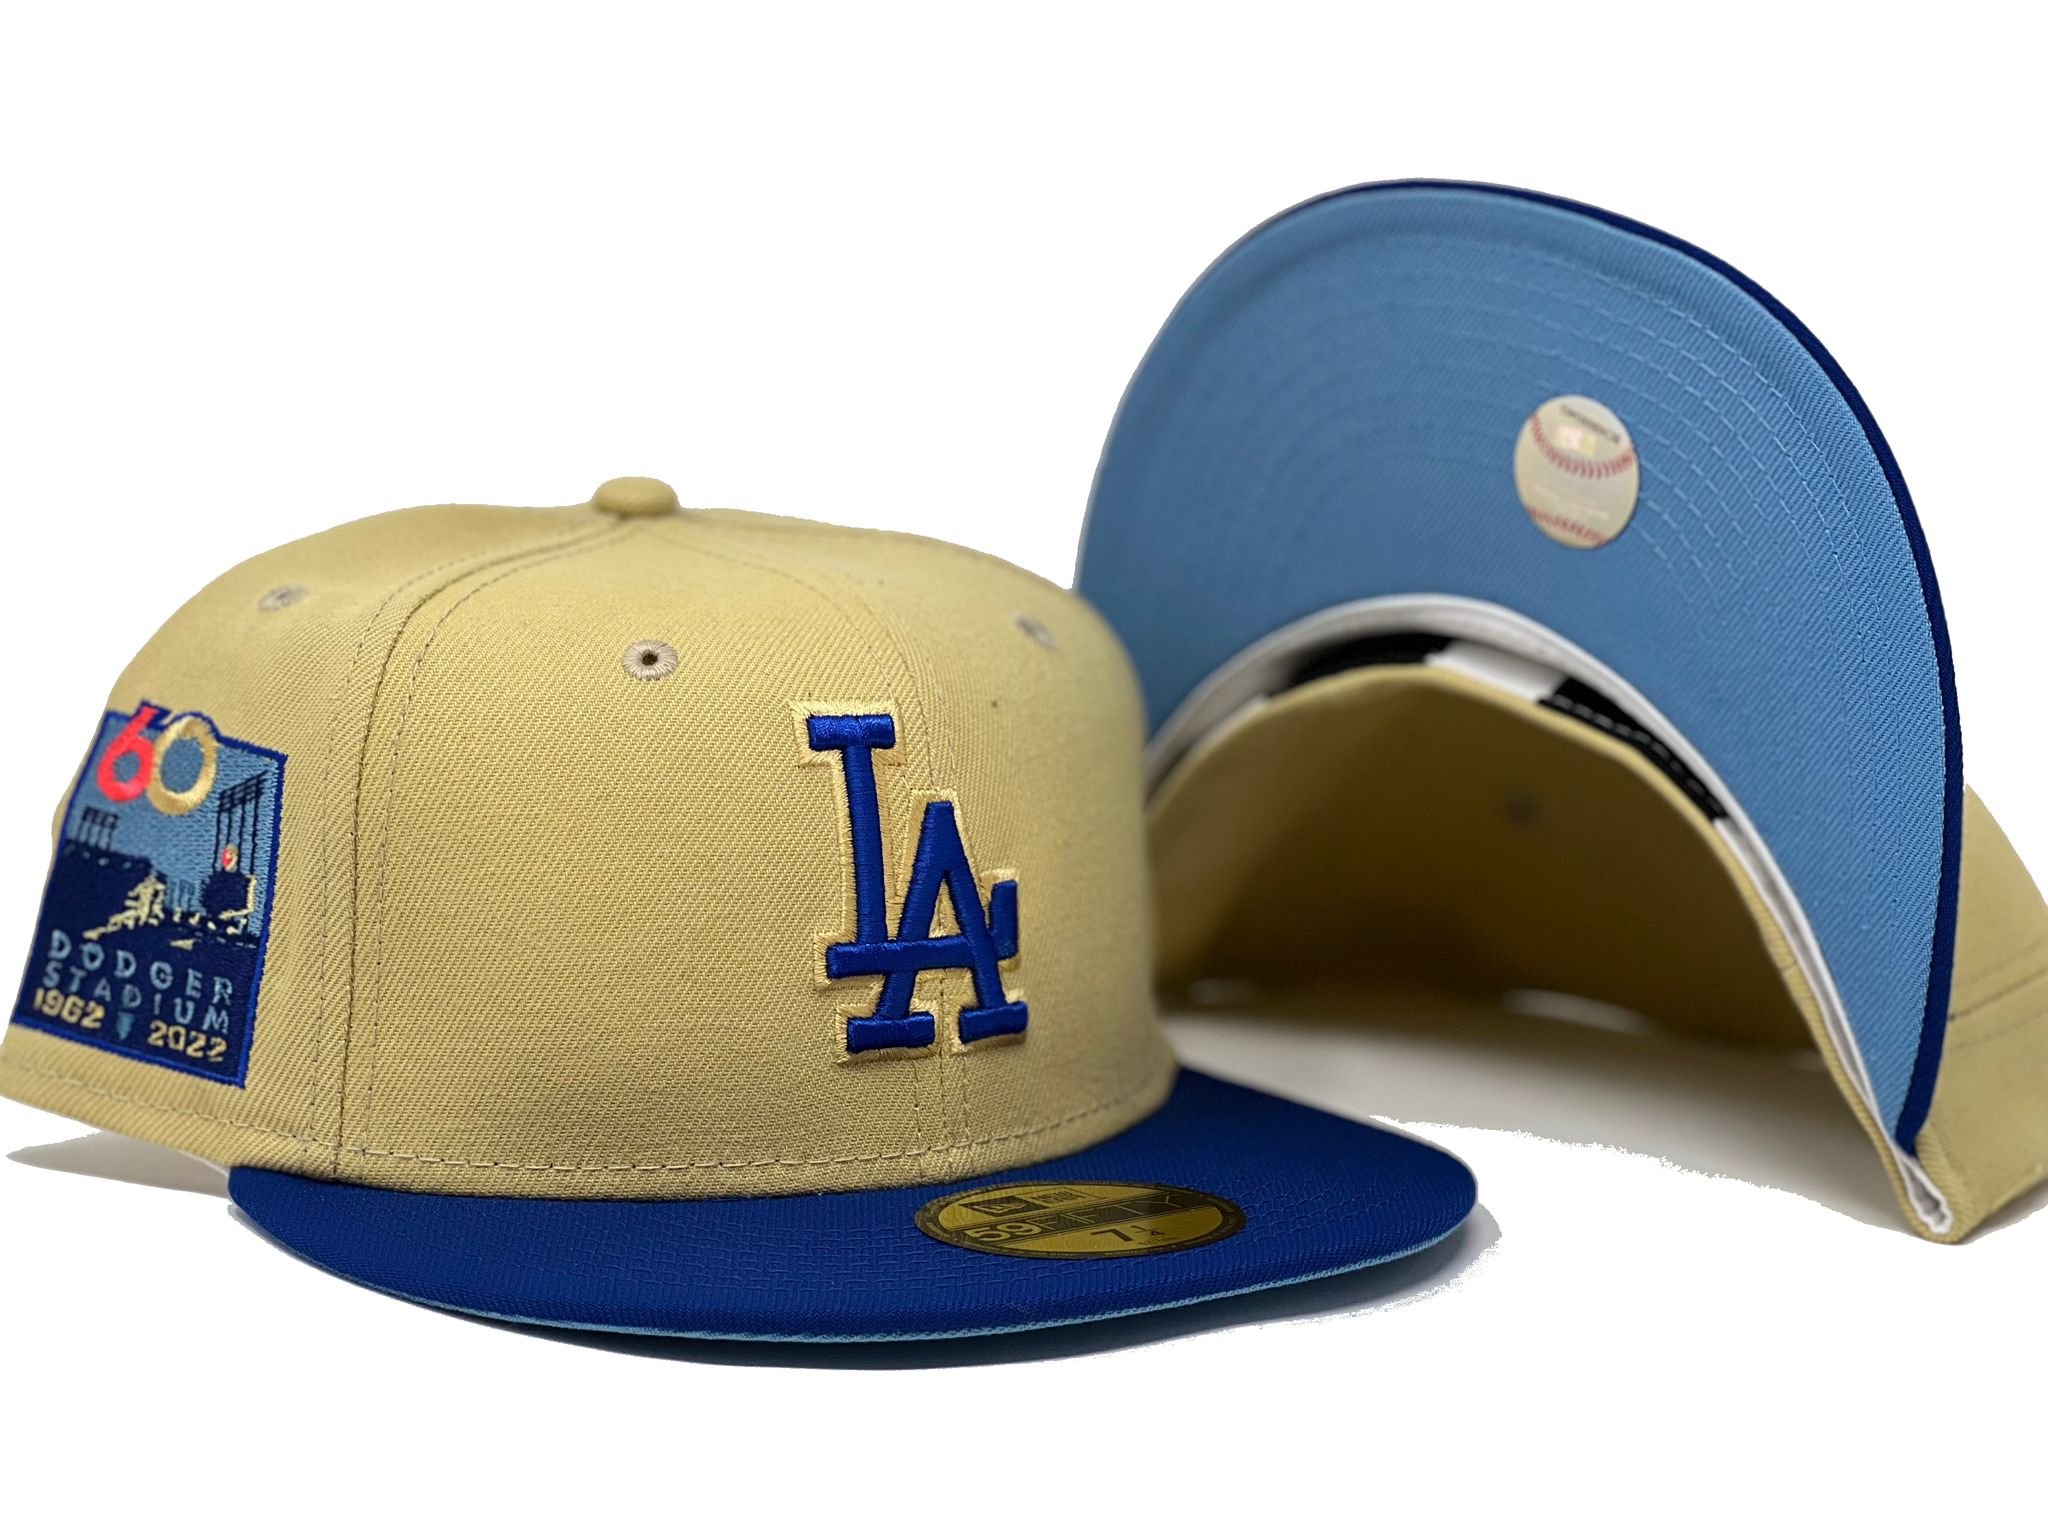 LOS ANGELES DODGERS 60TH SEASON YELLOW BRIM NEW ERA FITTED HAT